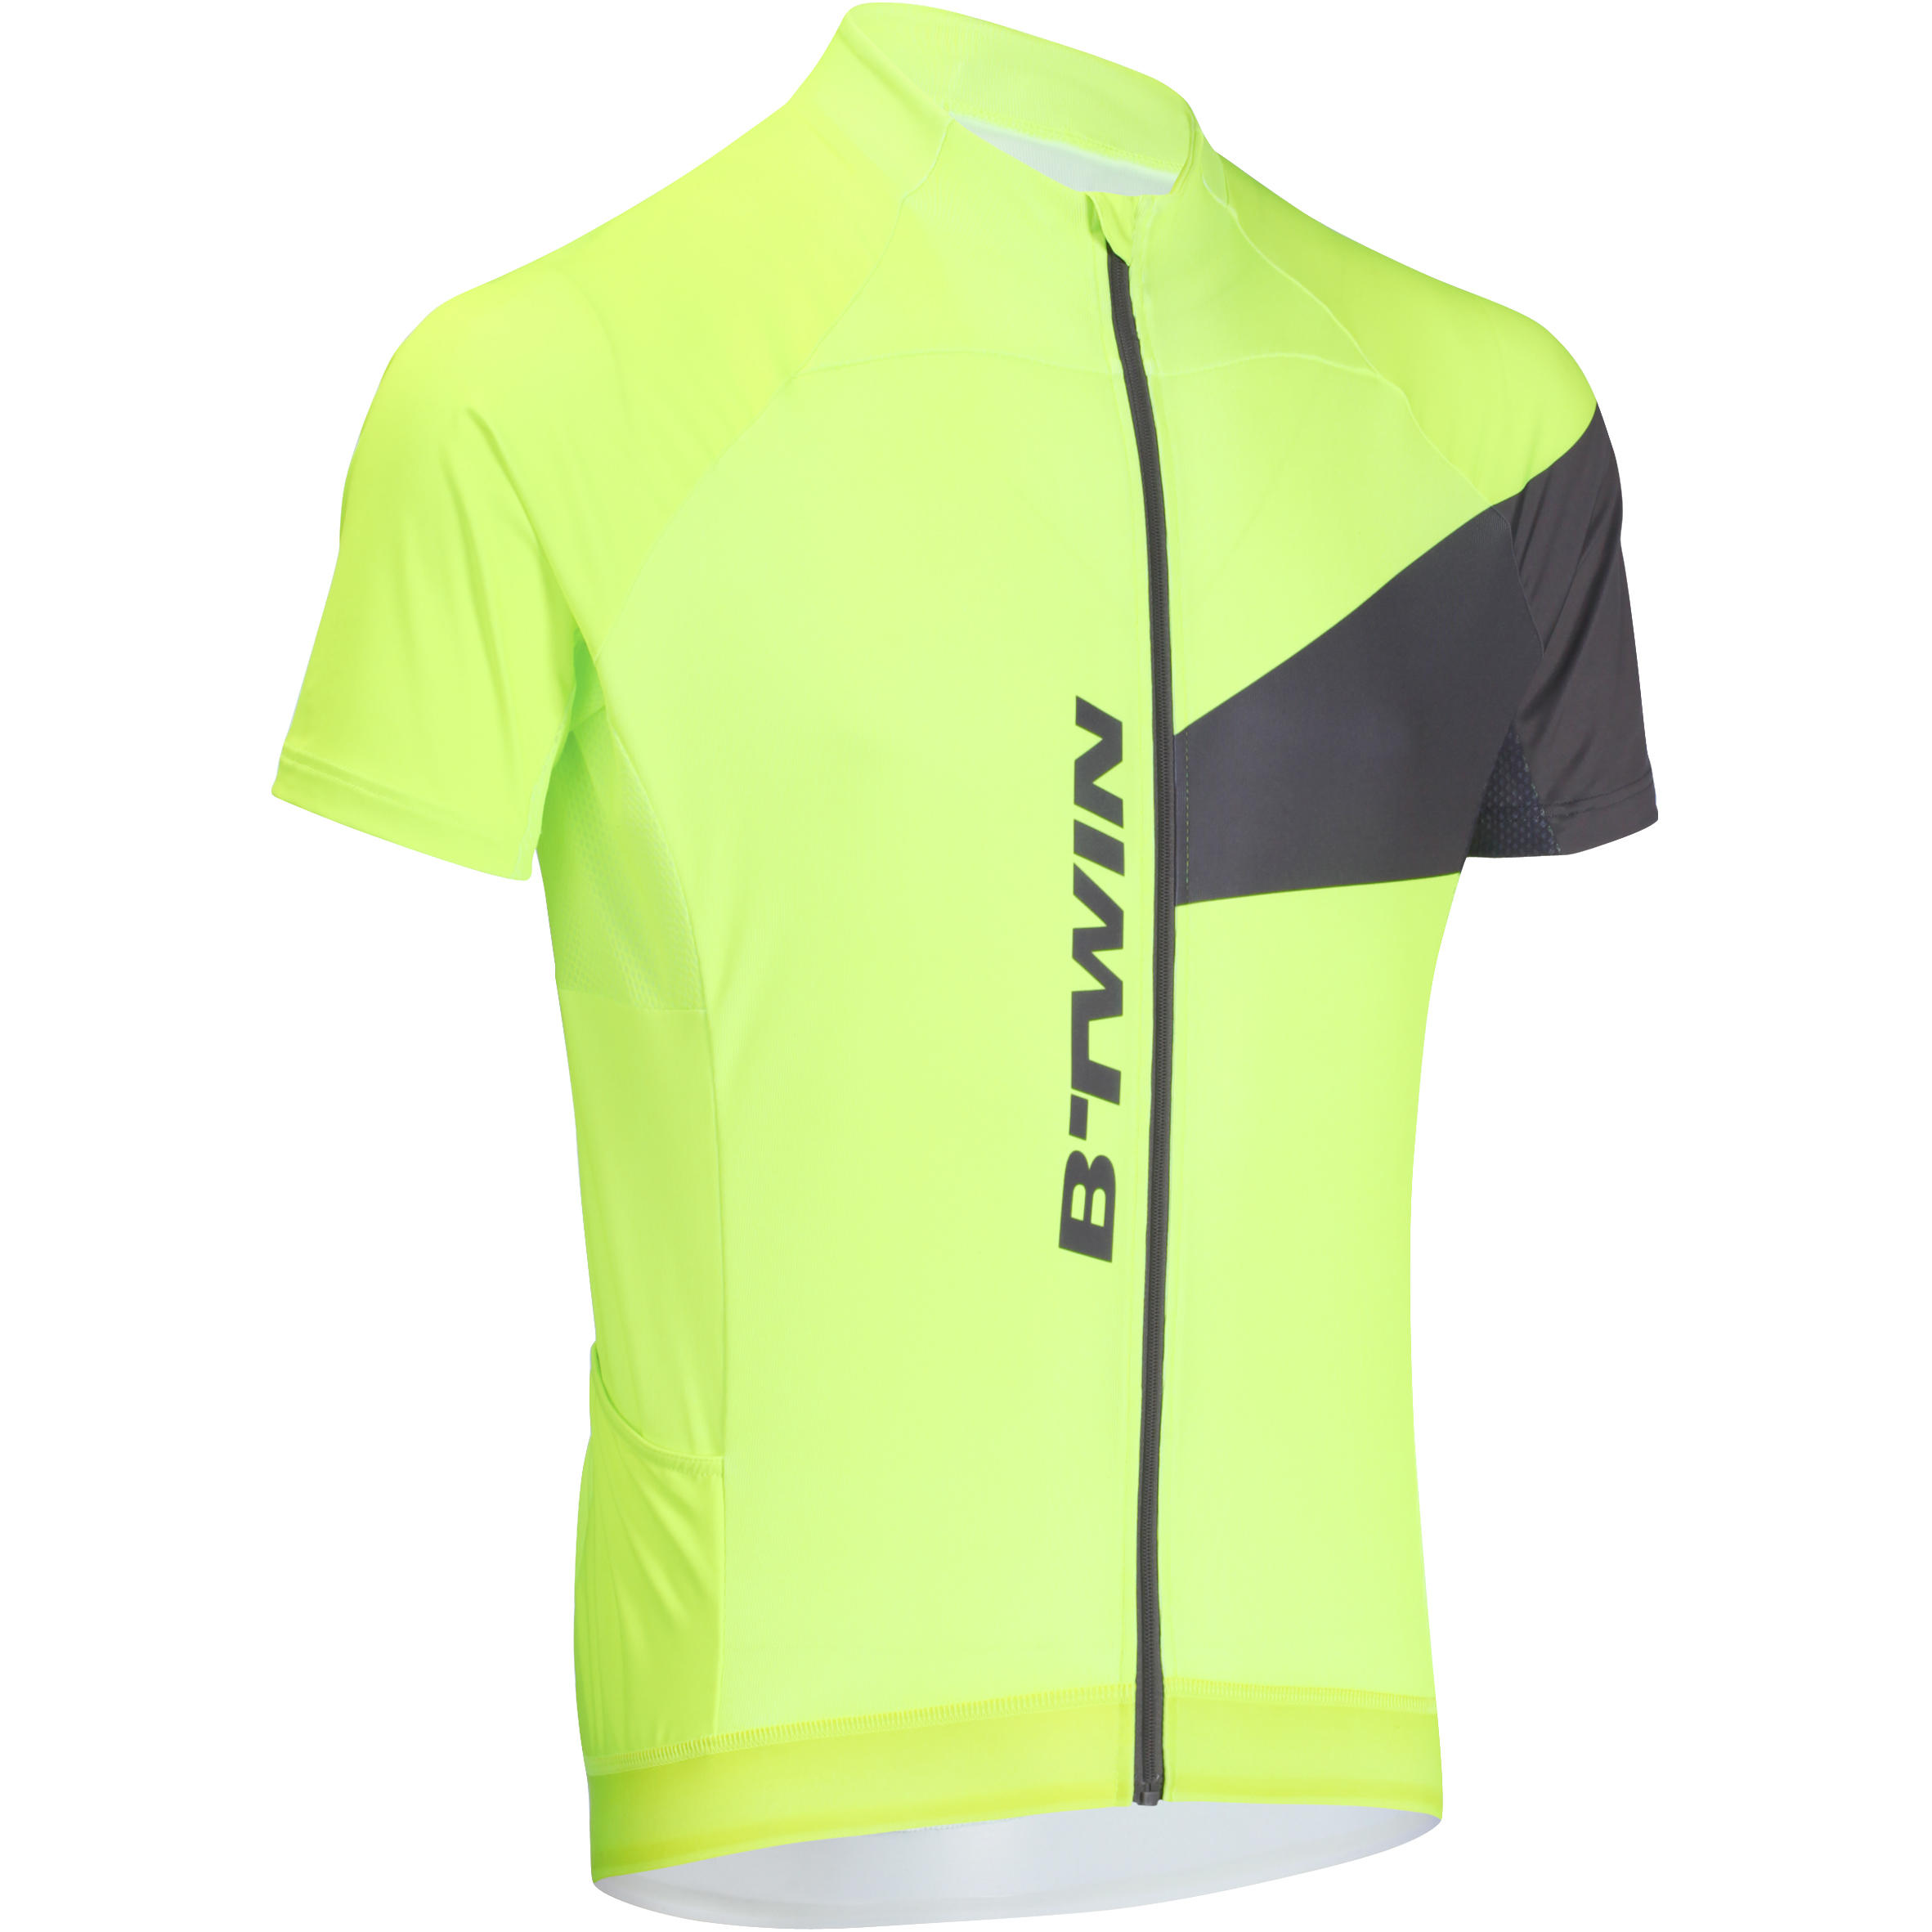 BTWIN 700 Short-Sleeved Cycling Jersey - Neon/Grey